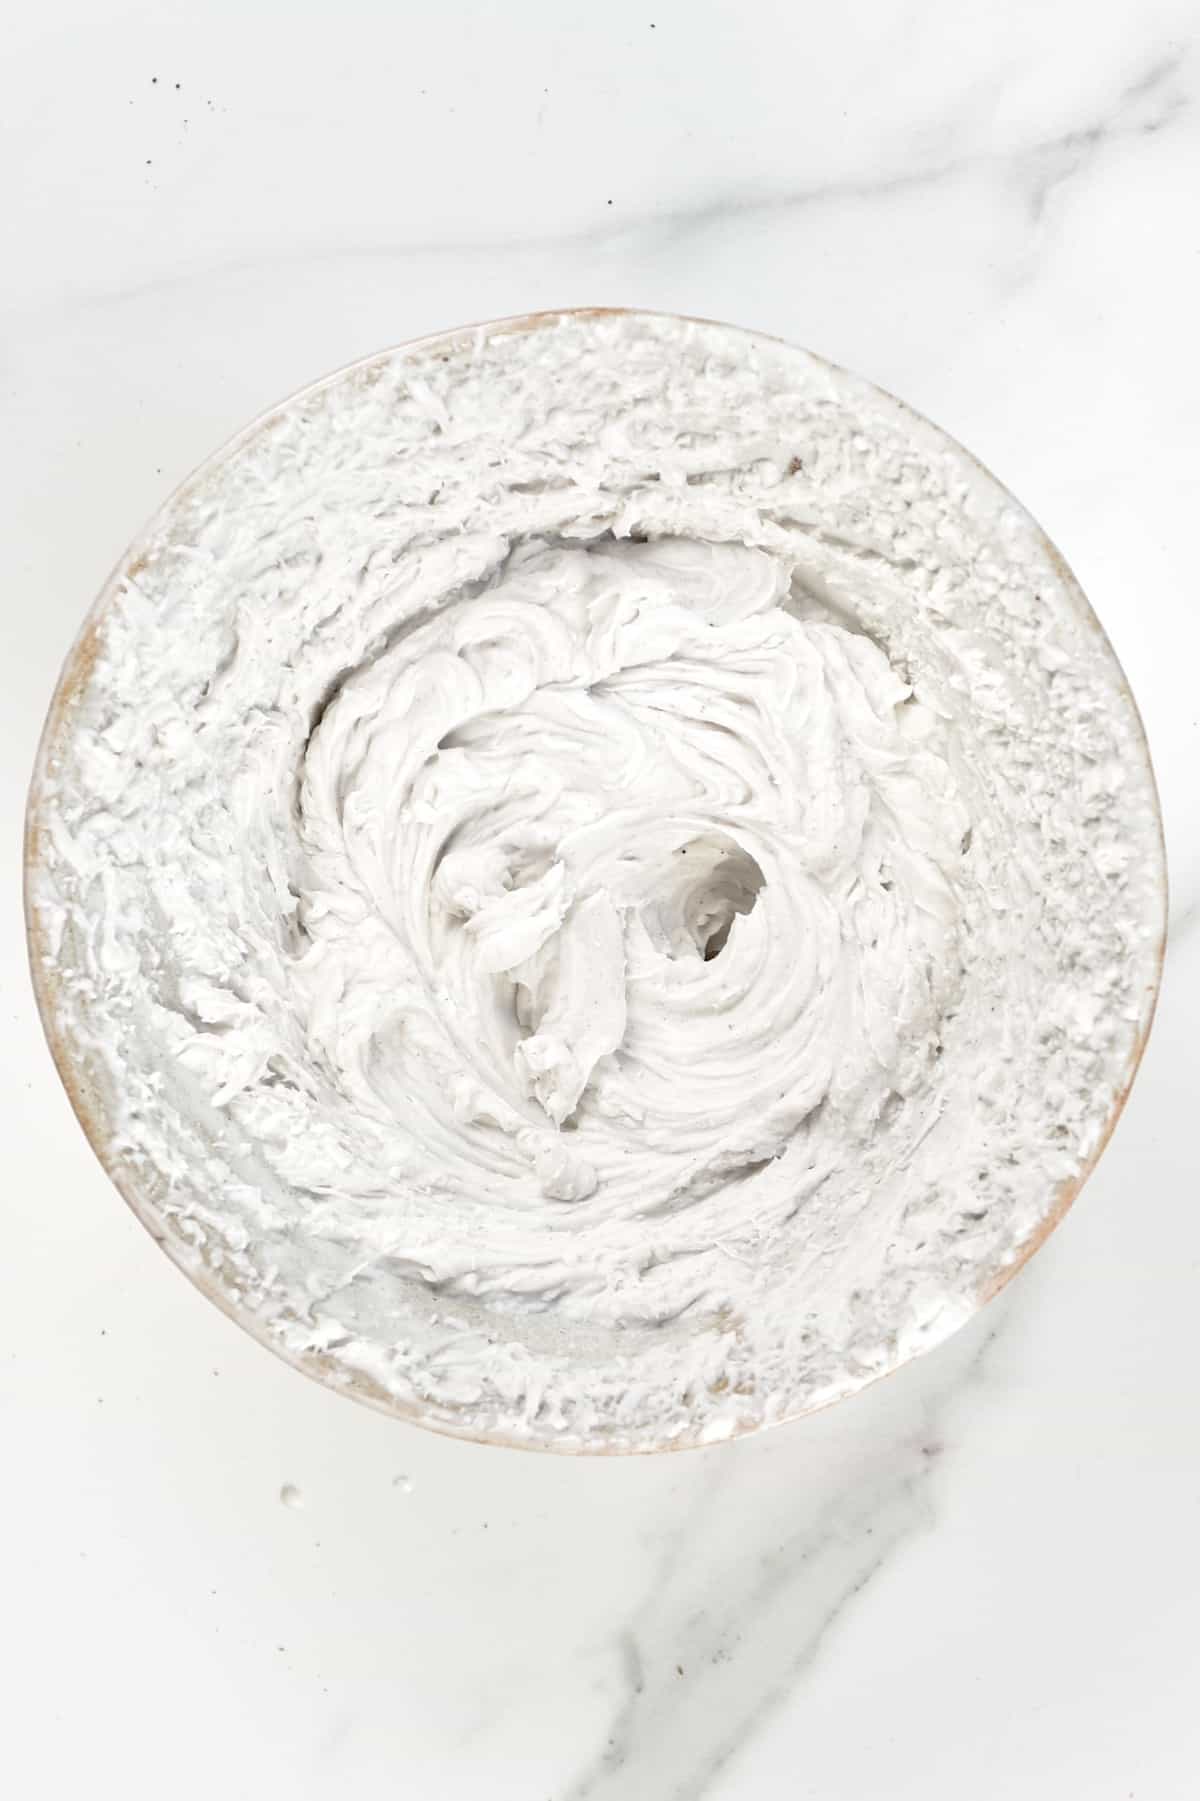 Whipped coconut cream in a bowl